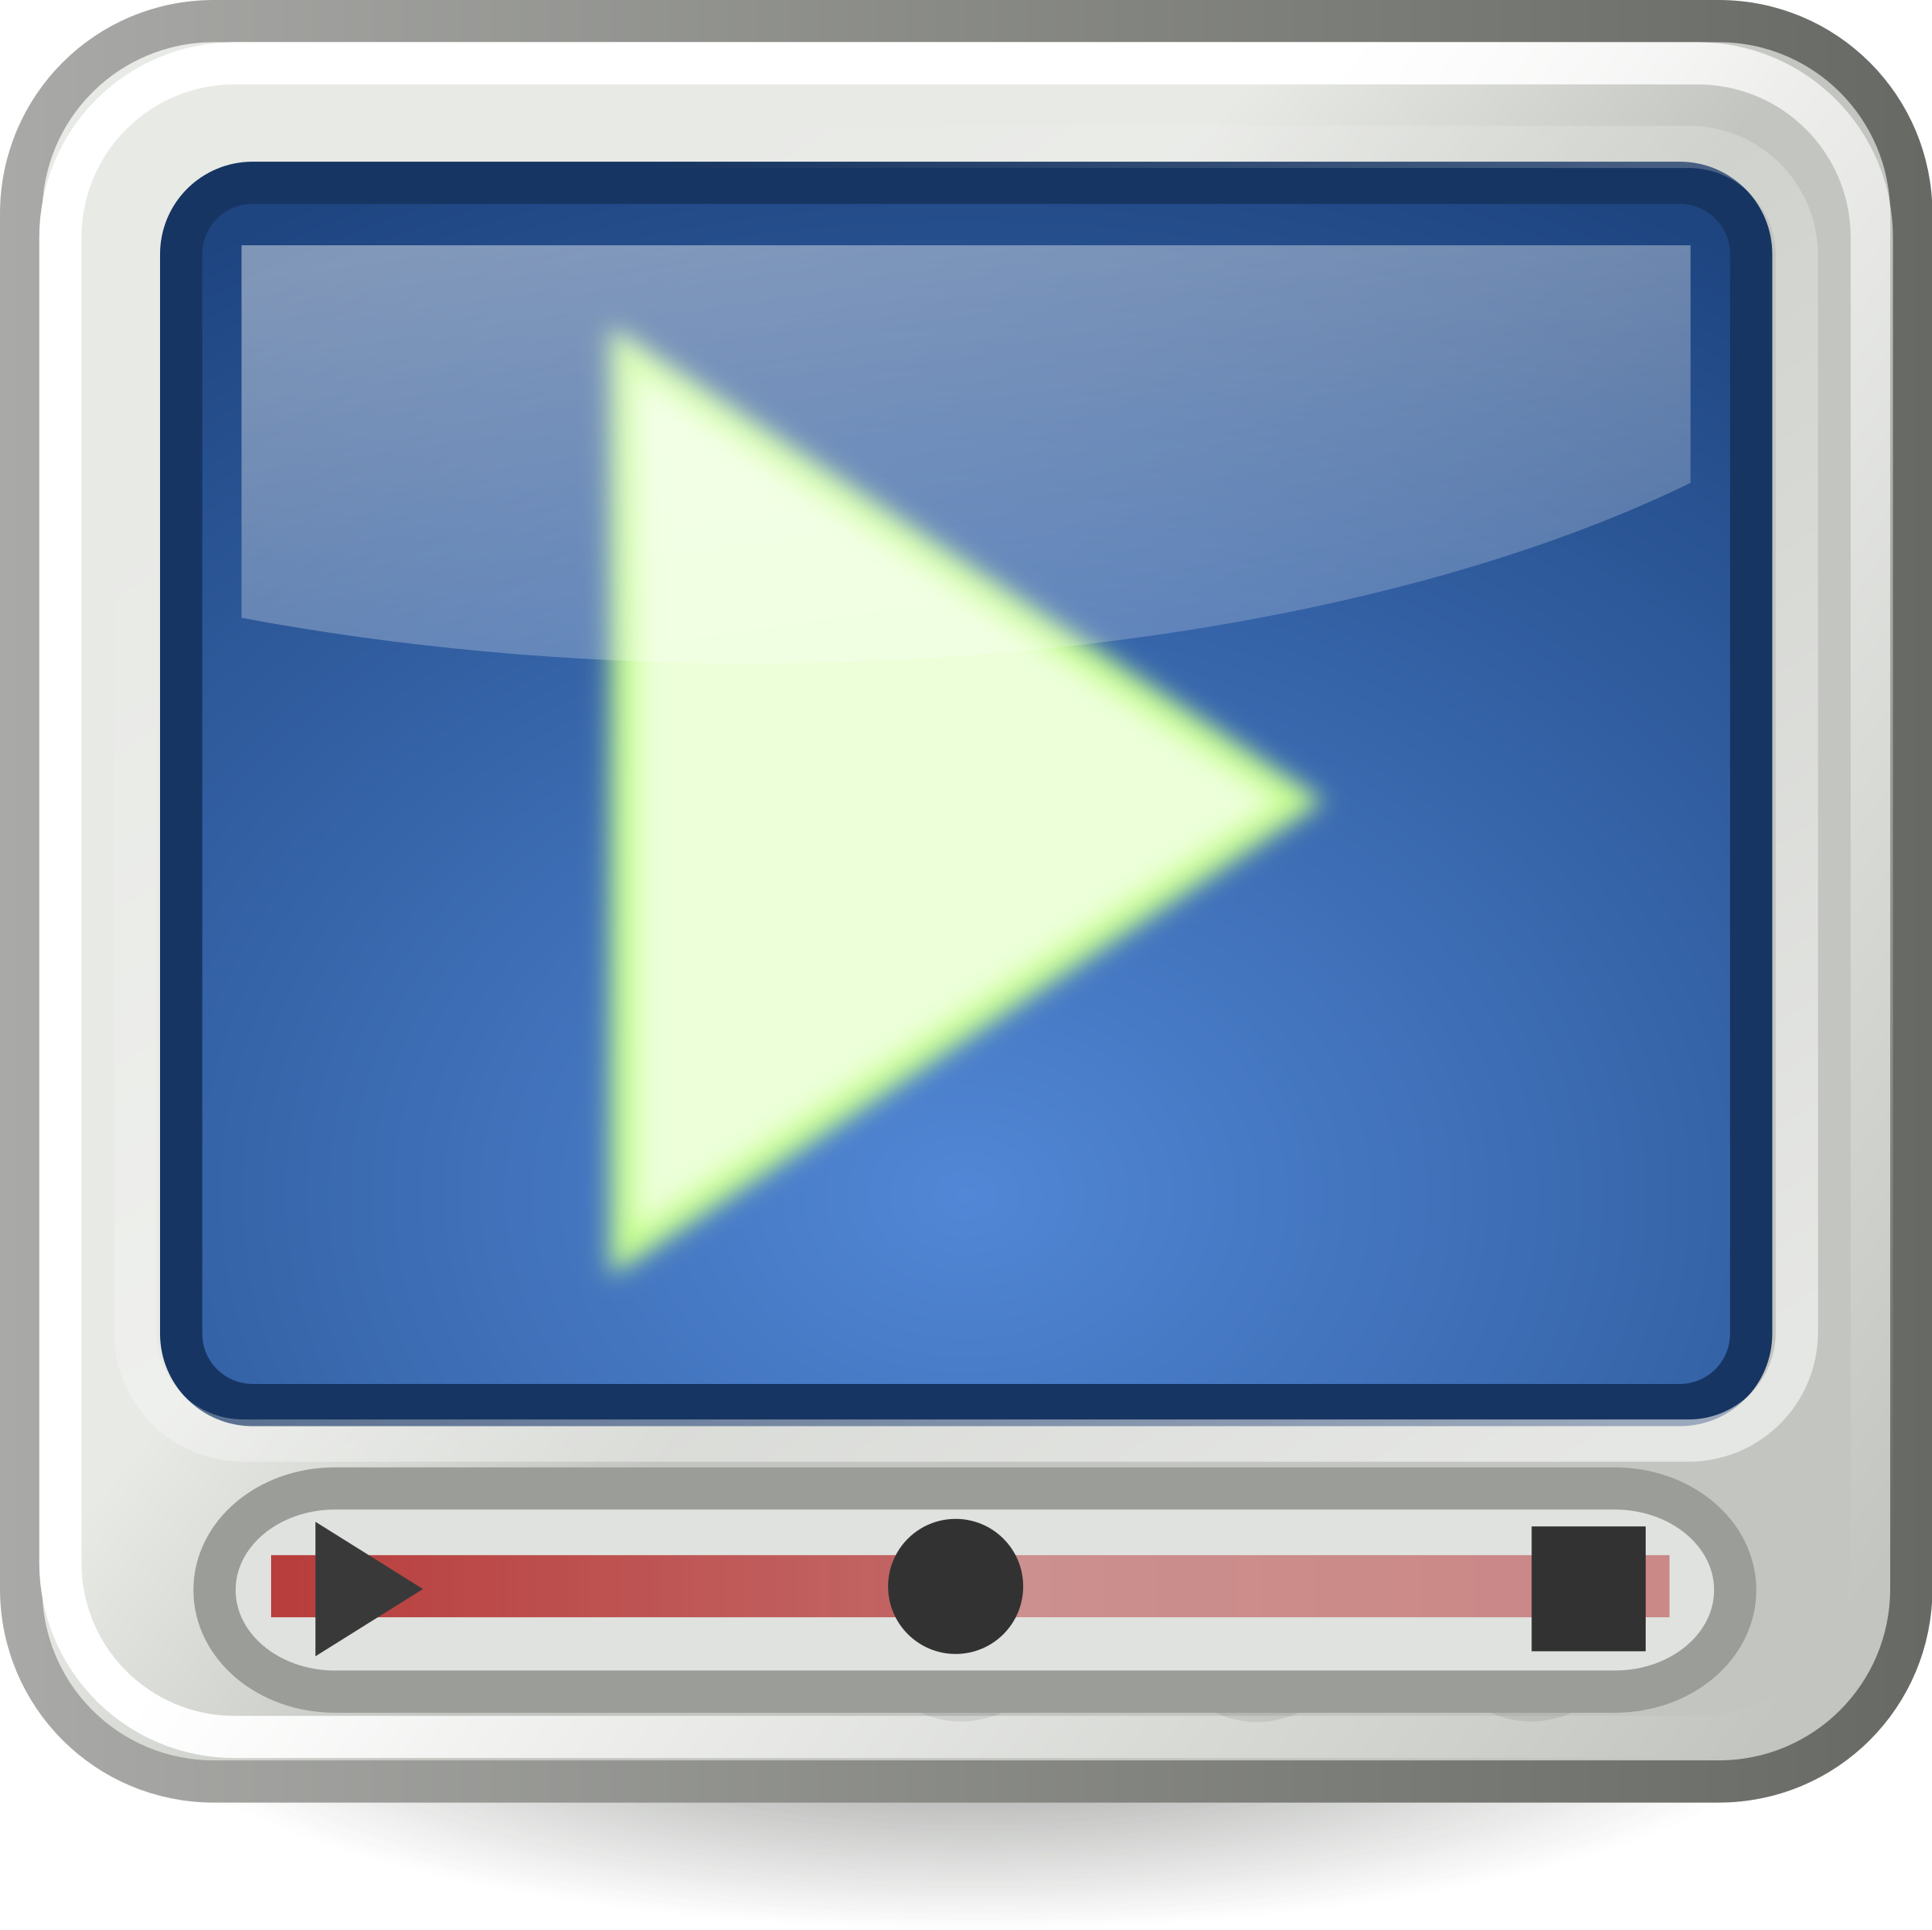 Graphics/Secondary-Icons/Candroid-Video/Video_Player_Tango-like_Icon.png